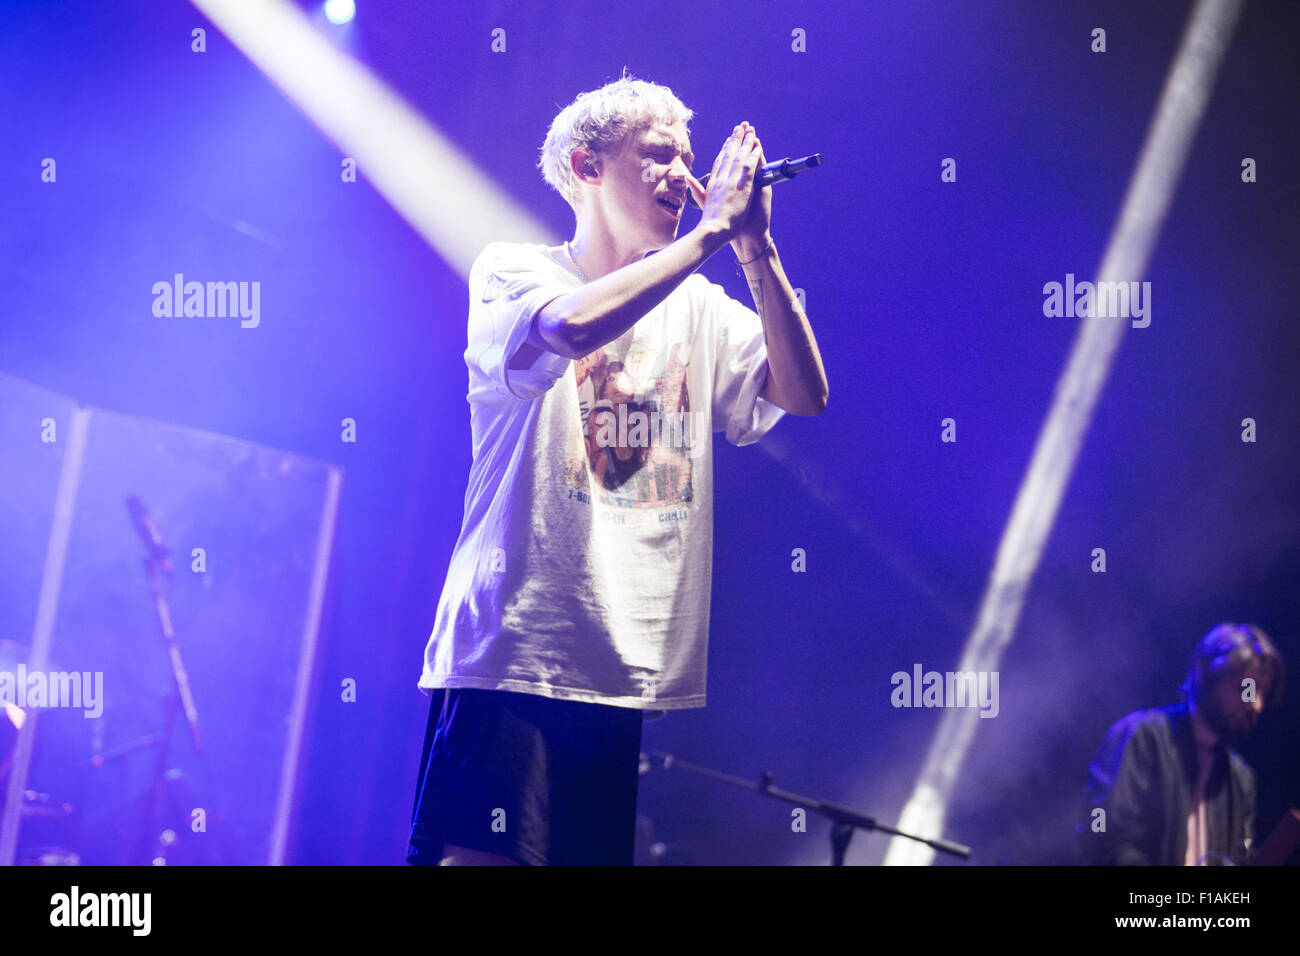 Aug. 28, 2015 - Leeds, England - Years and Years perform at Leeds Festival day 1, 2015 (Credit Image: © Myles Wright via ZUMA Wire) Stock Photo